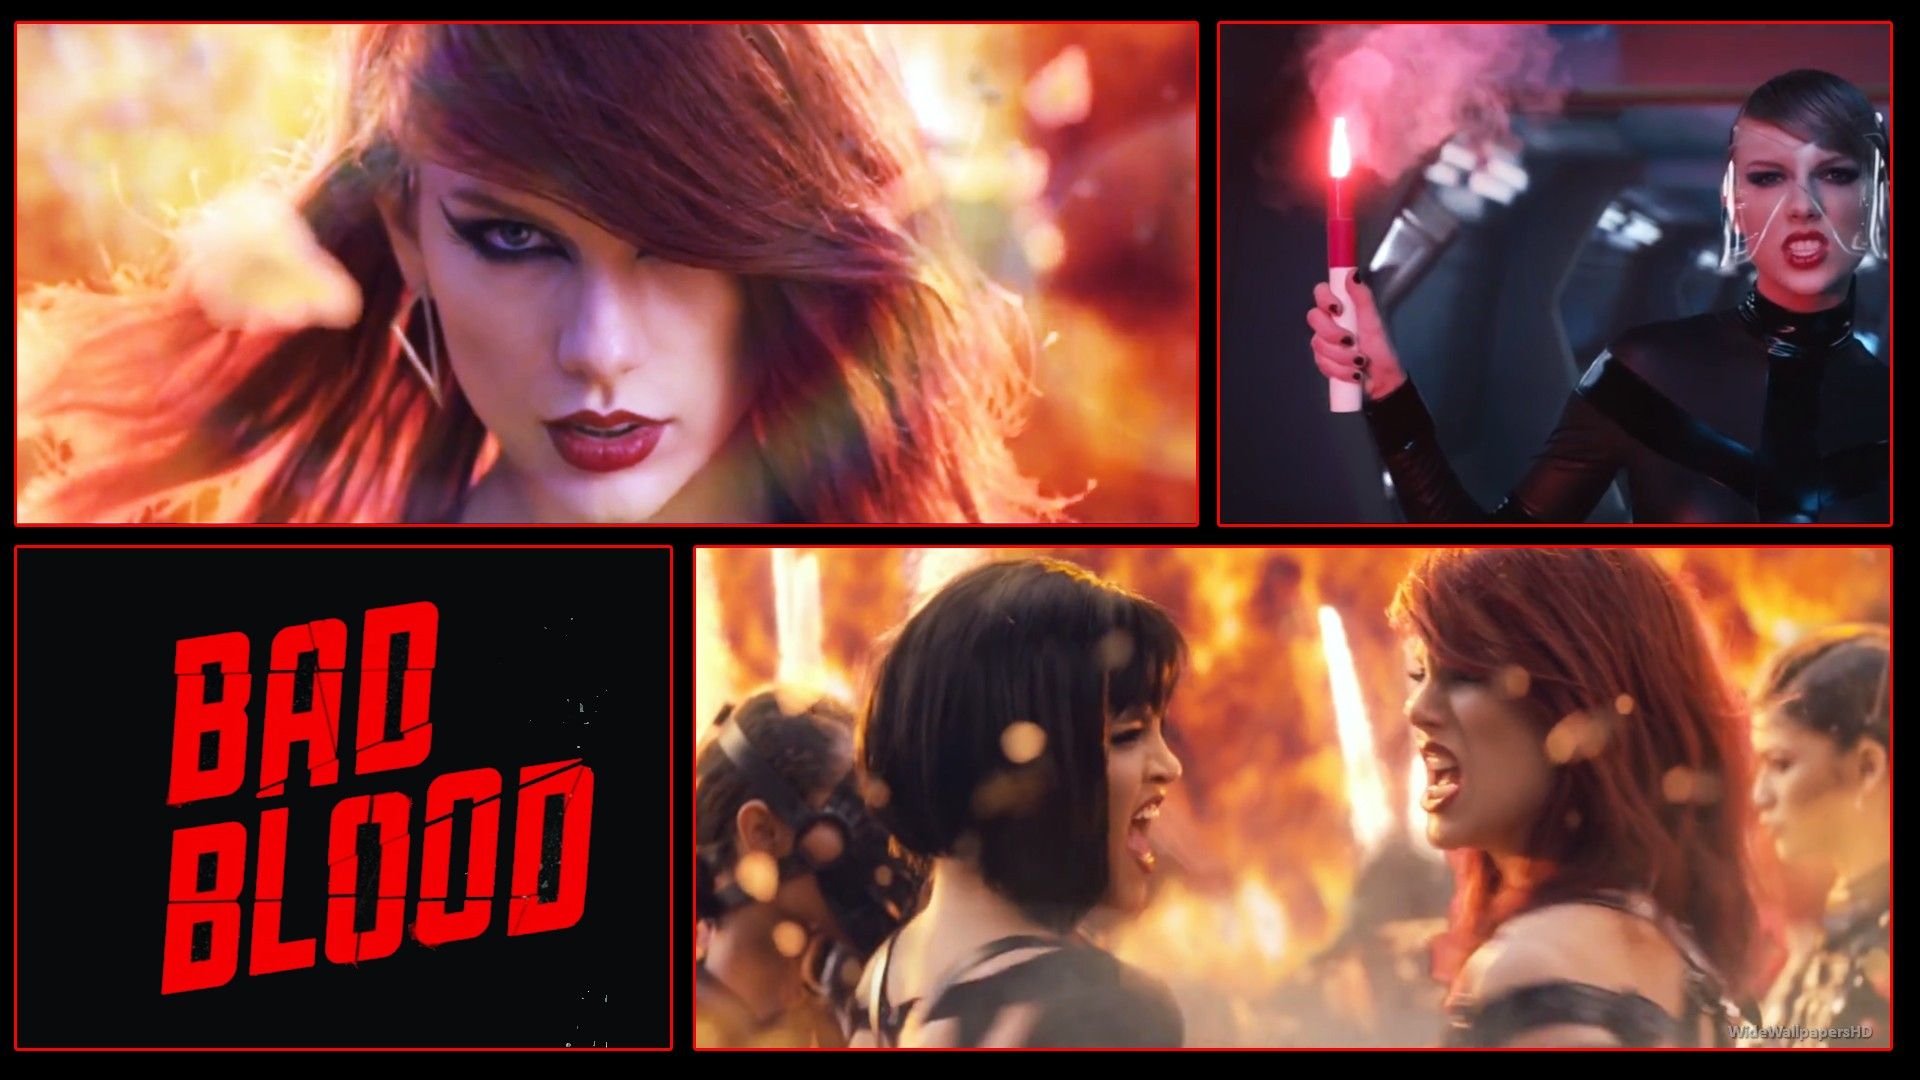 Free download taylor swift song Bad Blood Taylor Swift Songs 11 Wallpaper [1920x1080] for your Desktop, Mobile & Tablet. Explore Taylor Swift Bad Blood Wallpaper. Taylor Swift Wallpaper